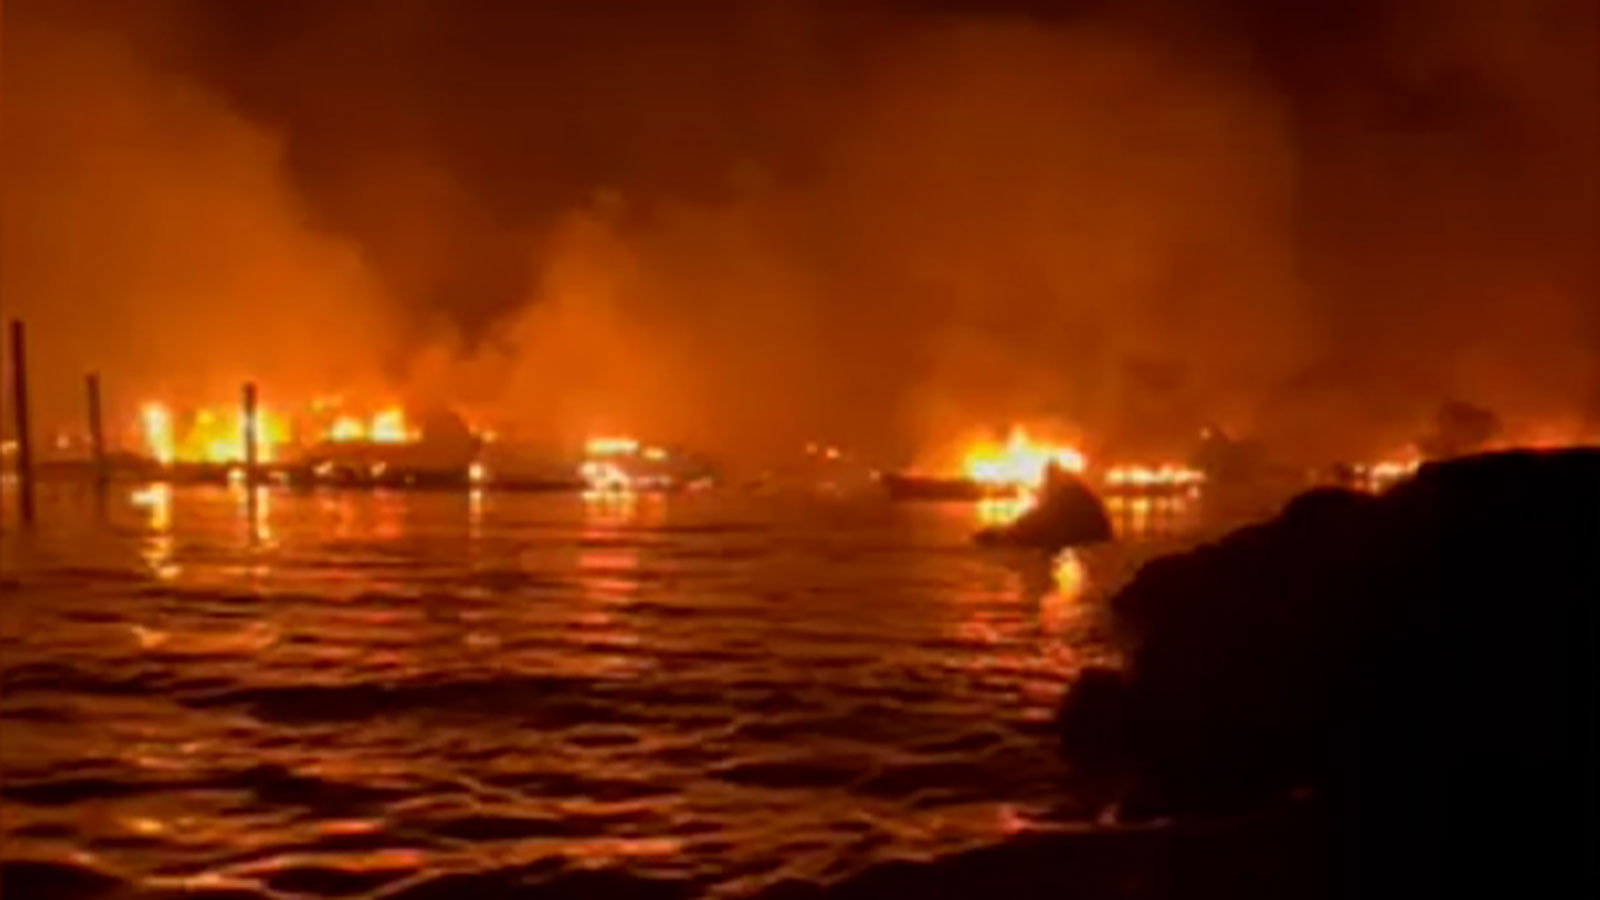 Emma Nelson recorded video from a boat offshore showing structureson land and boats in the water on fire as Lahaina burned Tuesday night. 